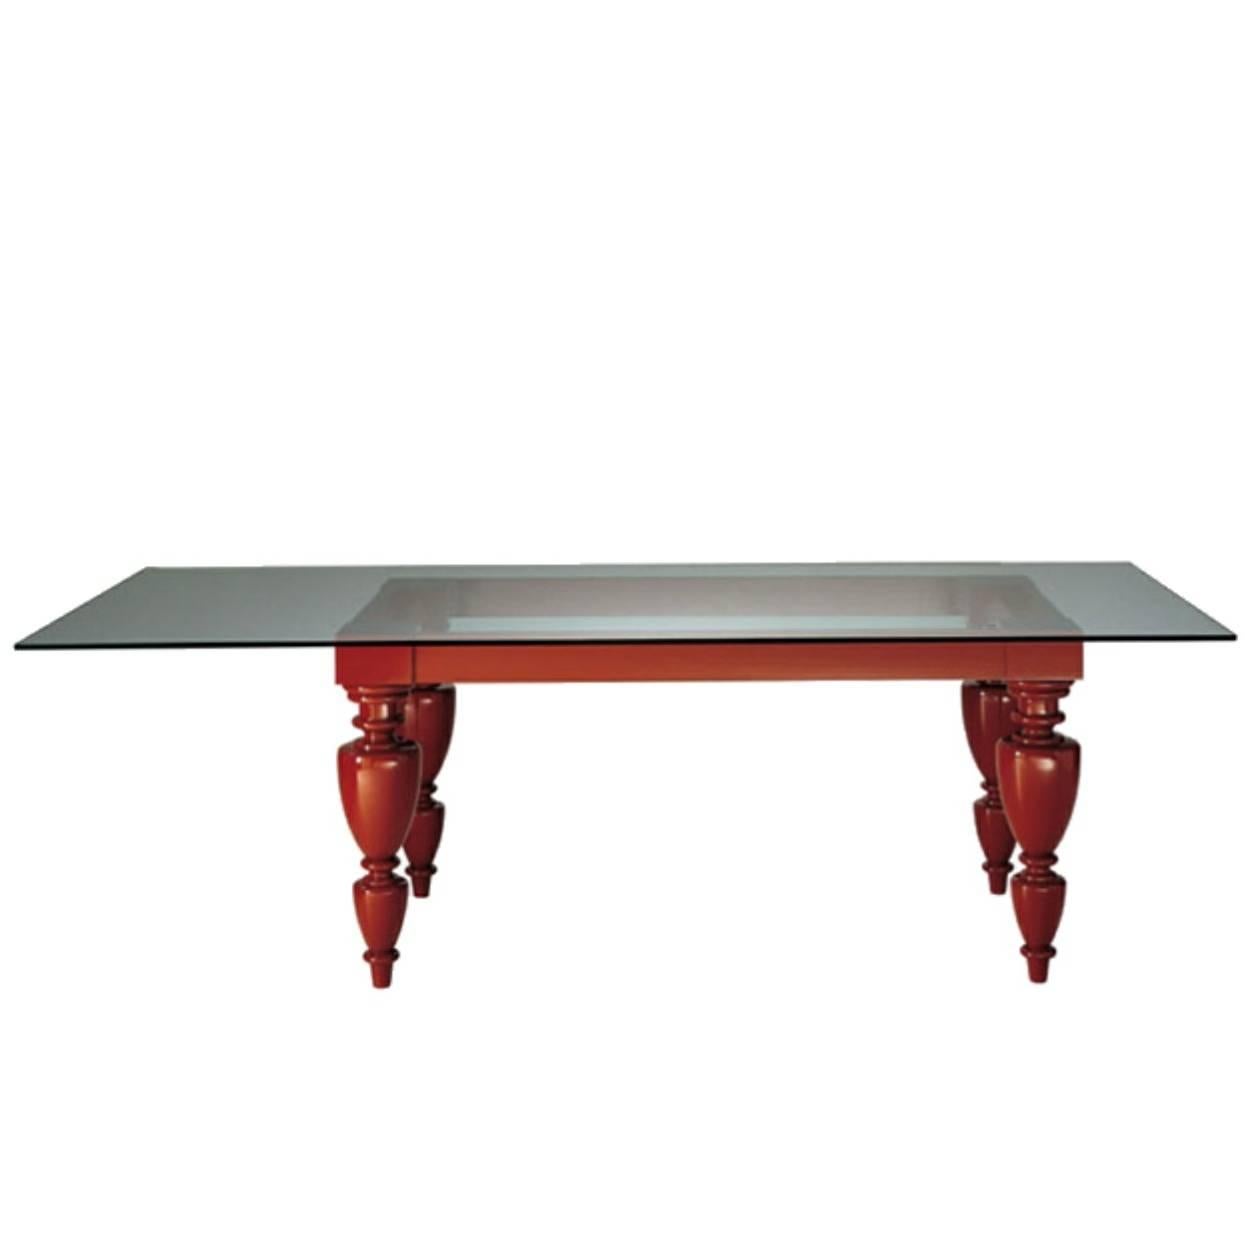 Original Zanotta Dorian 7025 dining table. Designed by Dominique Matthieu for Zanotta in 2002. Glossy lacquered wooden table legs and frame in red (RAL3003) with a 12mm thick plate glass top. Contemporary Italian design at its' finest.